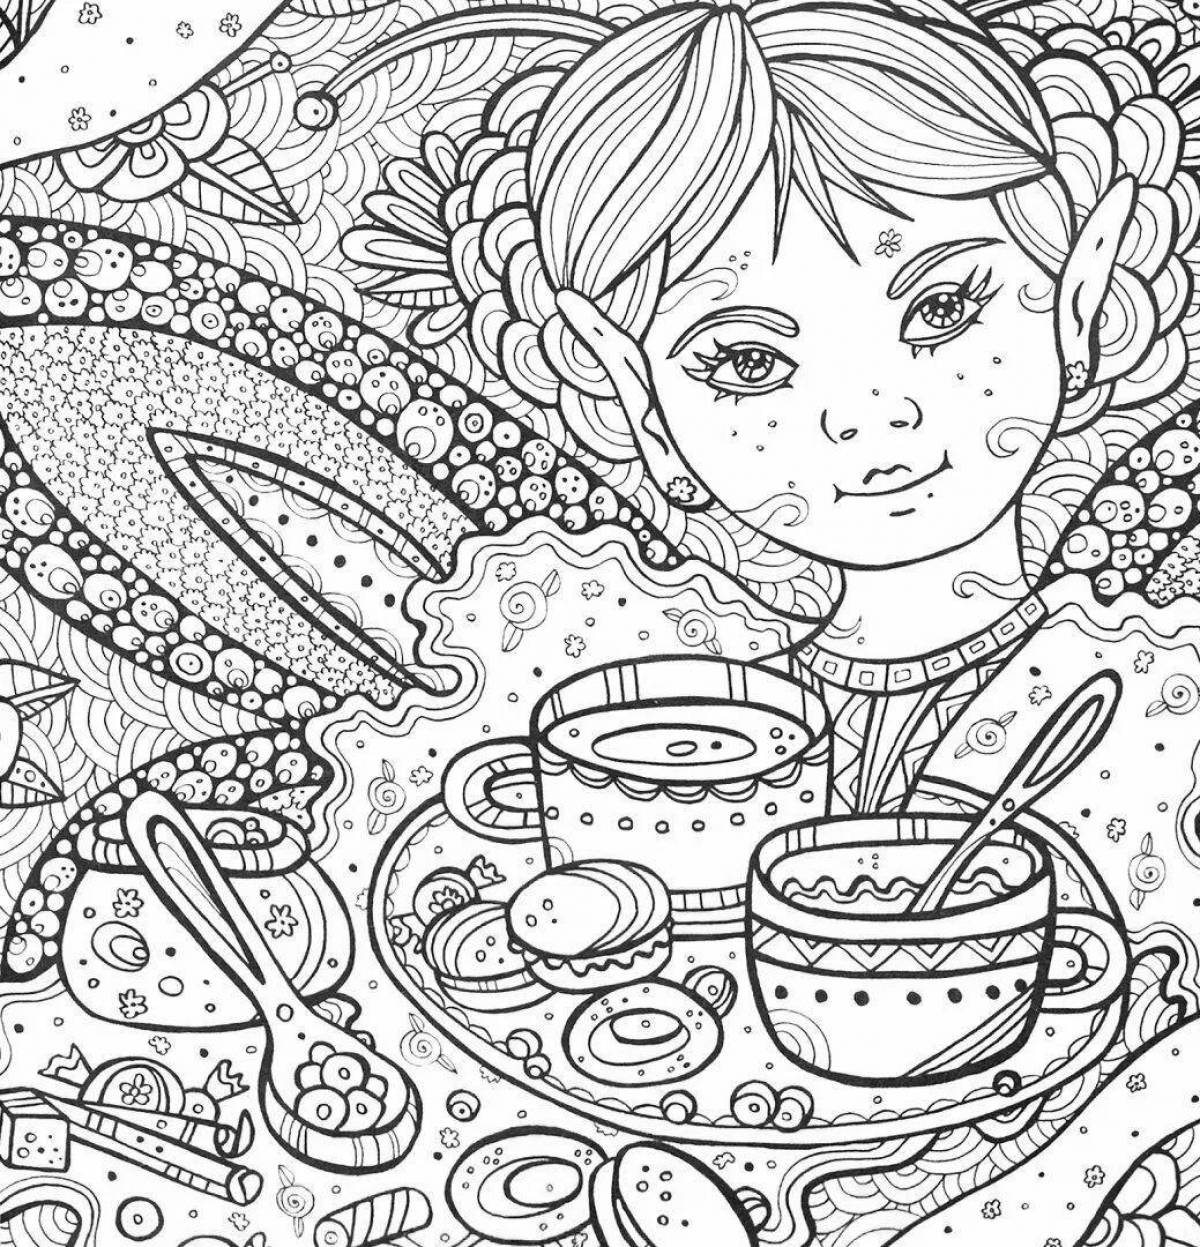 Sublime coloring page 11 years difficult